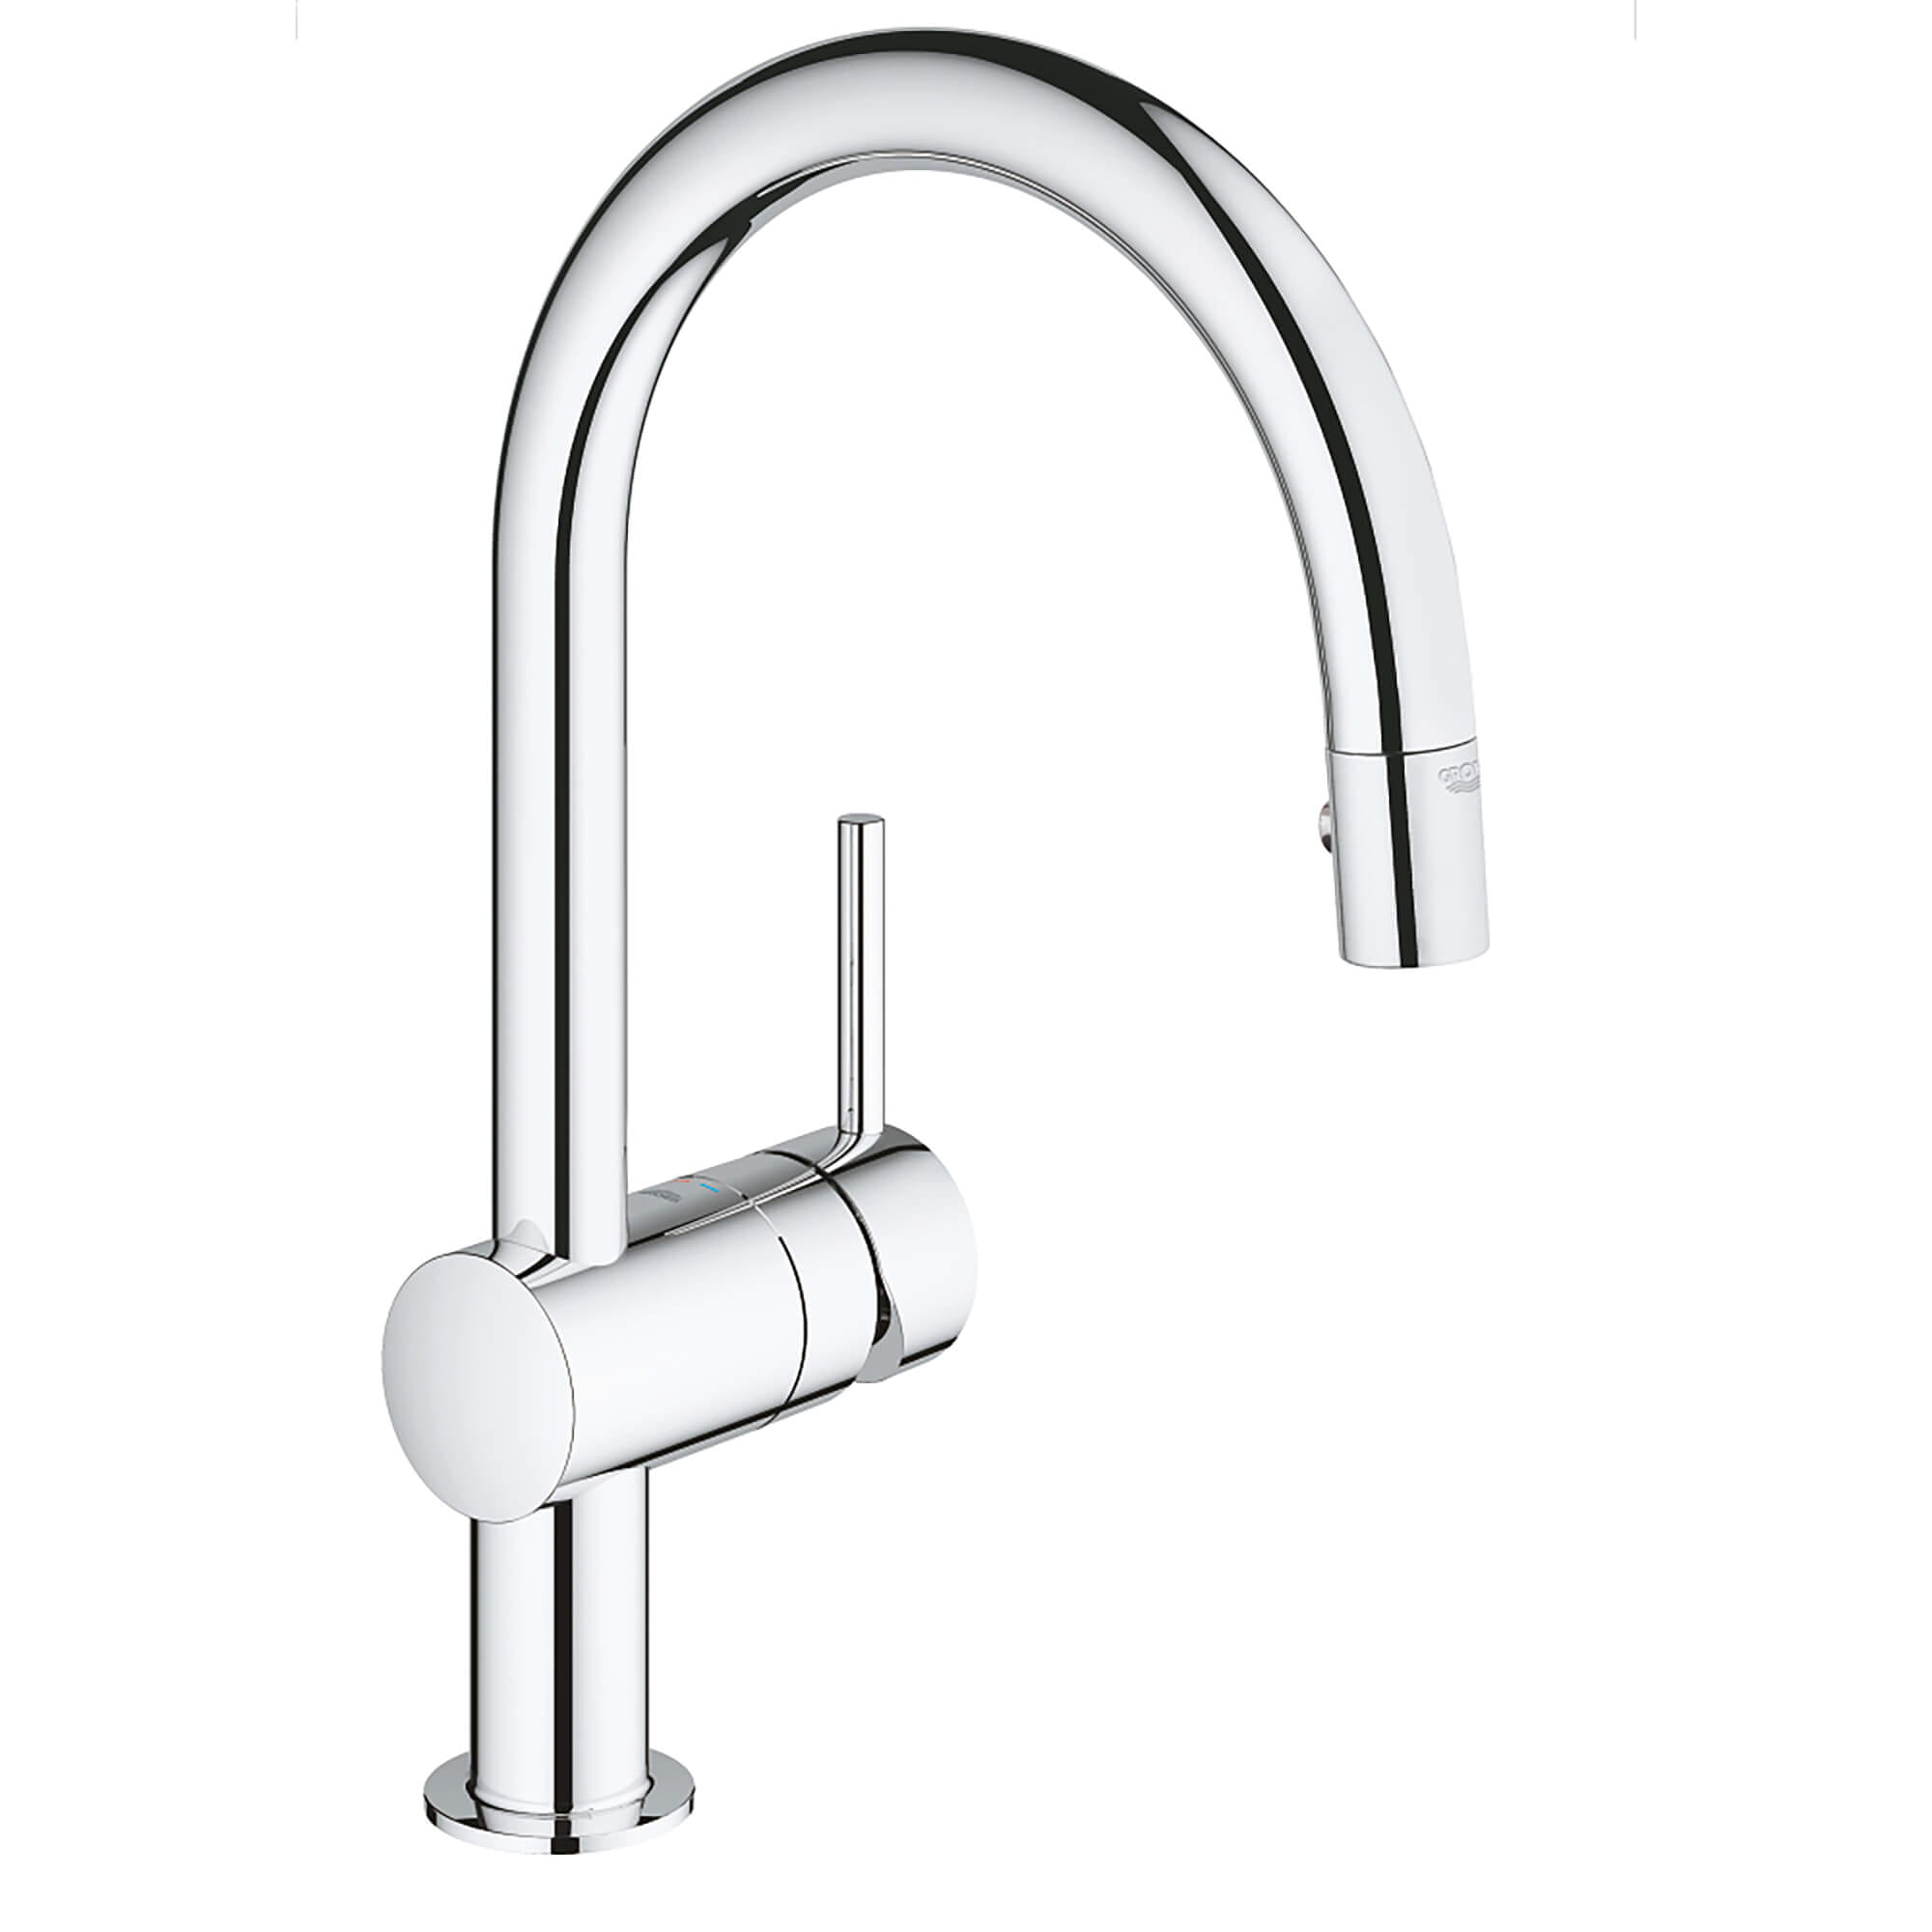 Single Handle Pull Down Kitchen Faucet Dual Spray 175 GPM GROHE CHROME